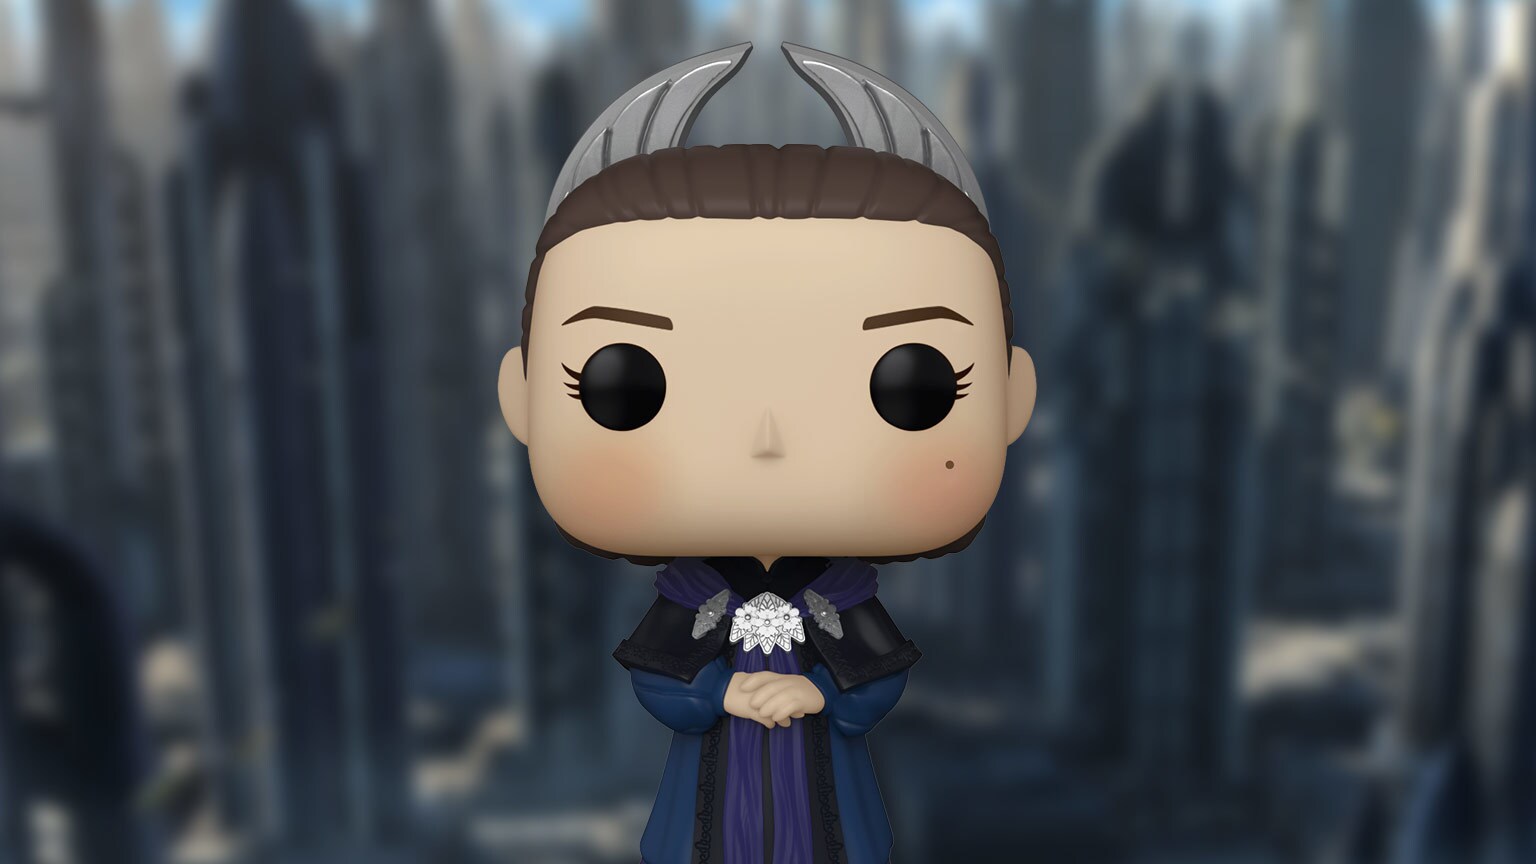 Funko Celebrates Padmé and the “Power of the Galaxy” – Exclusive